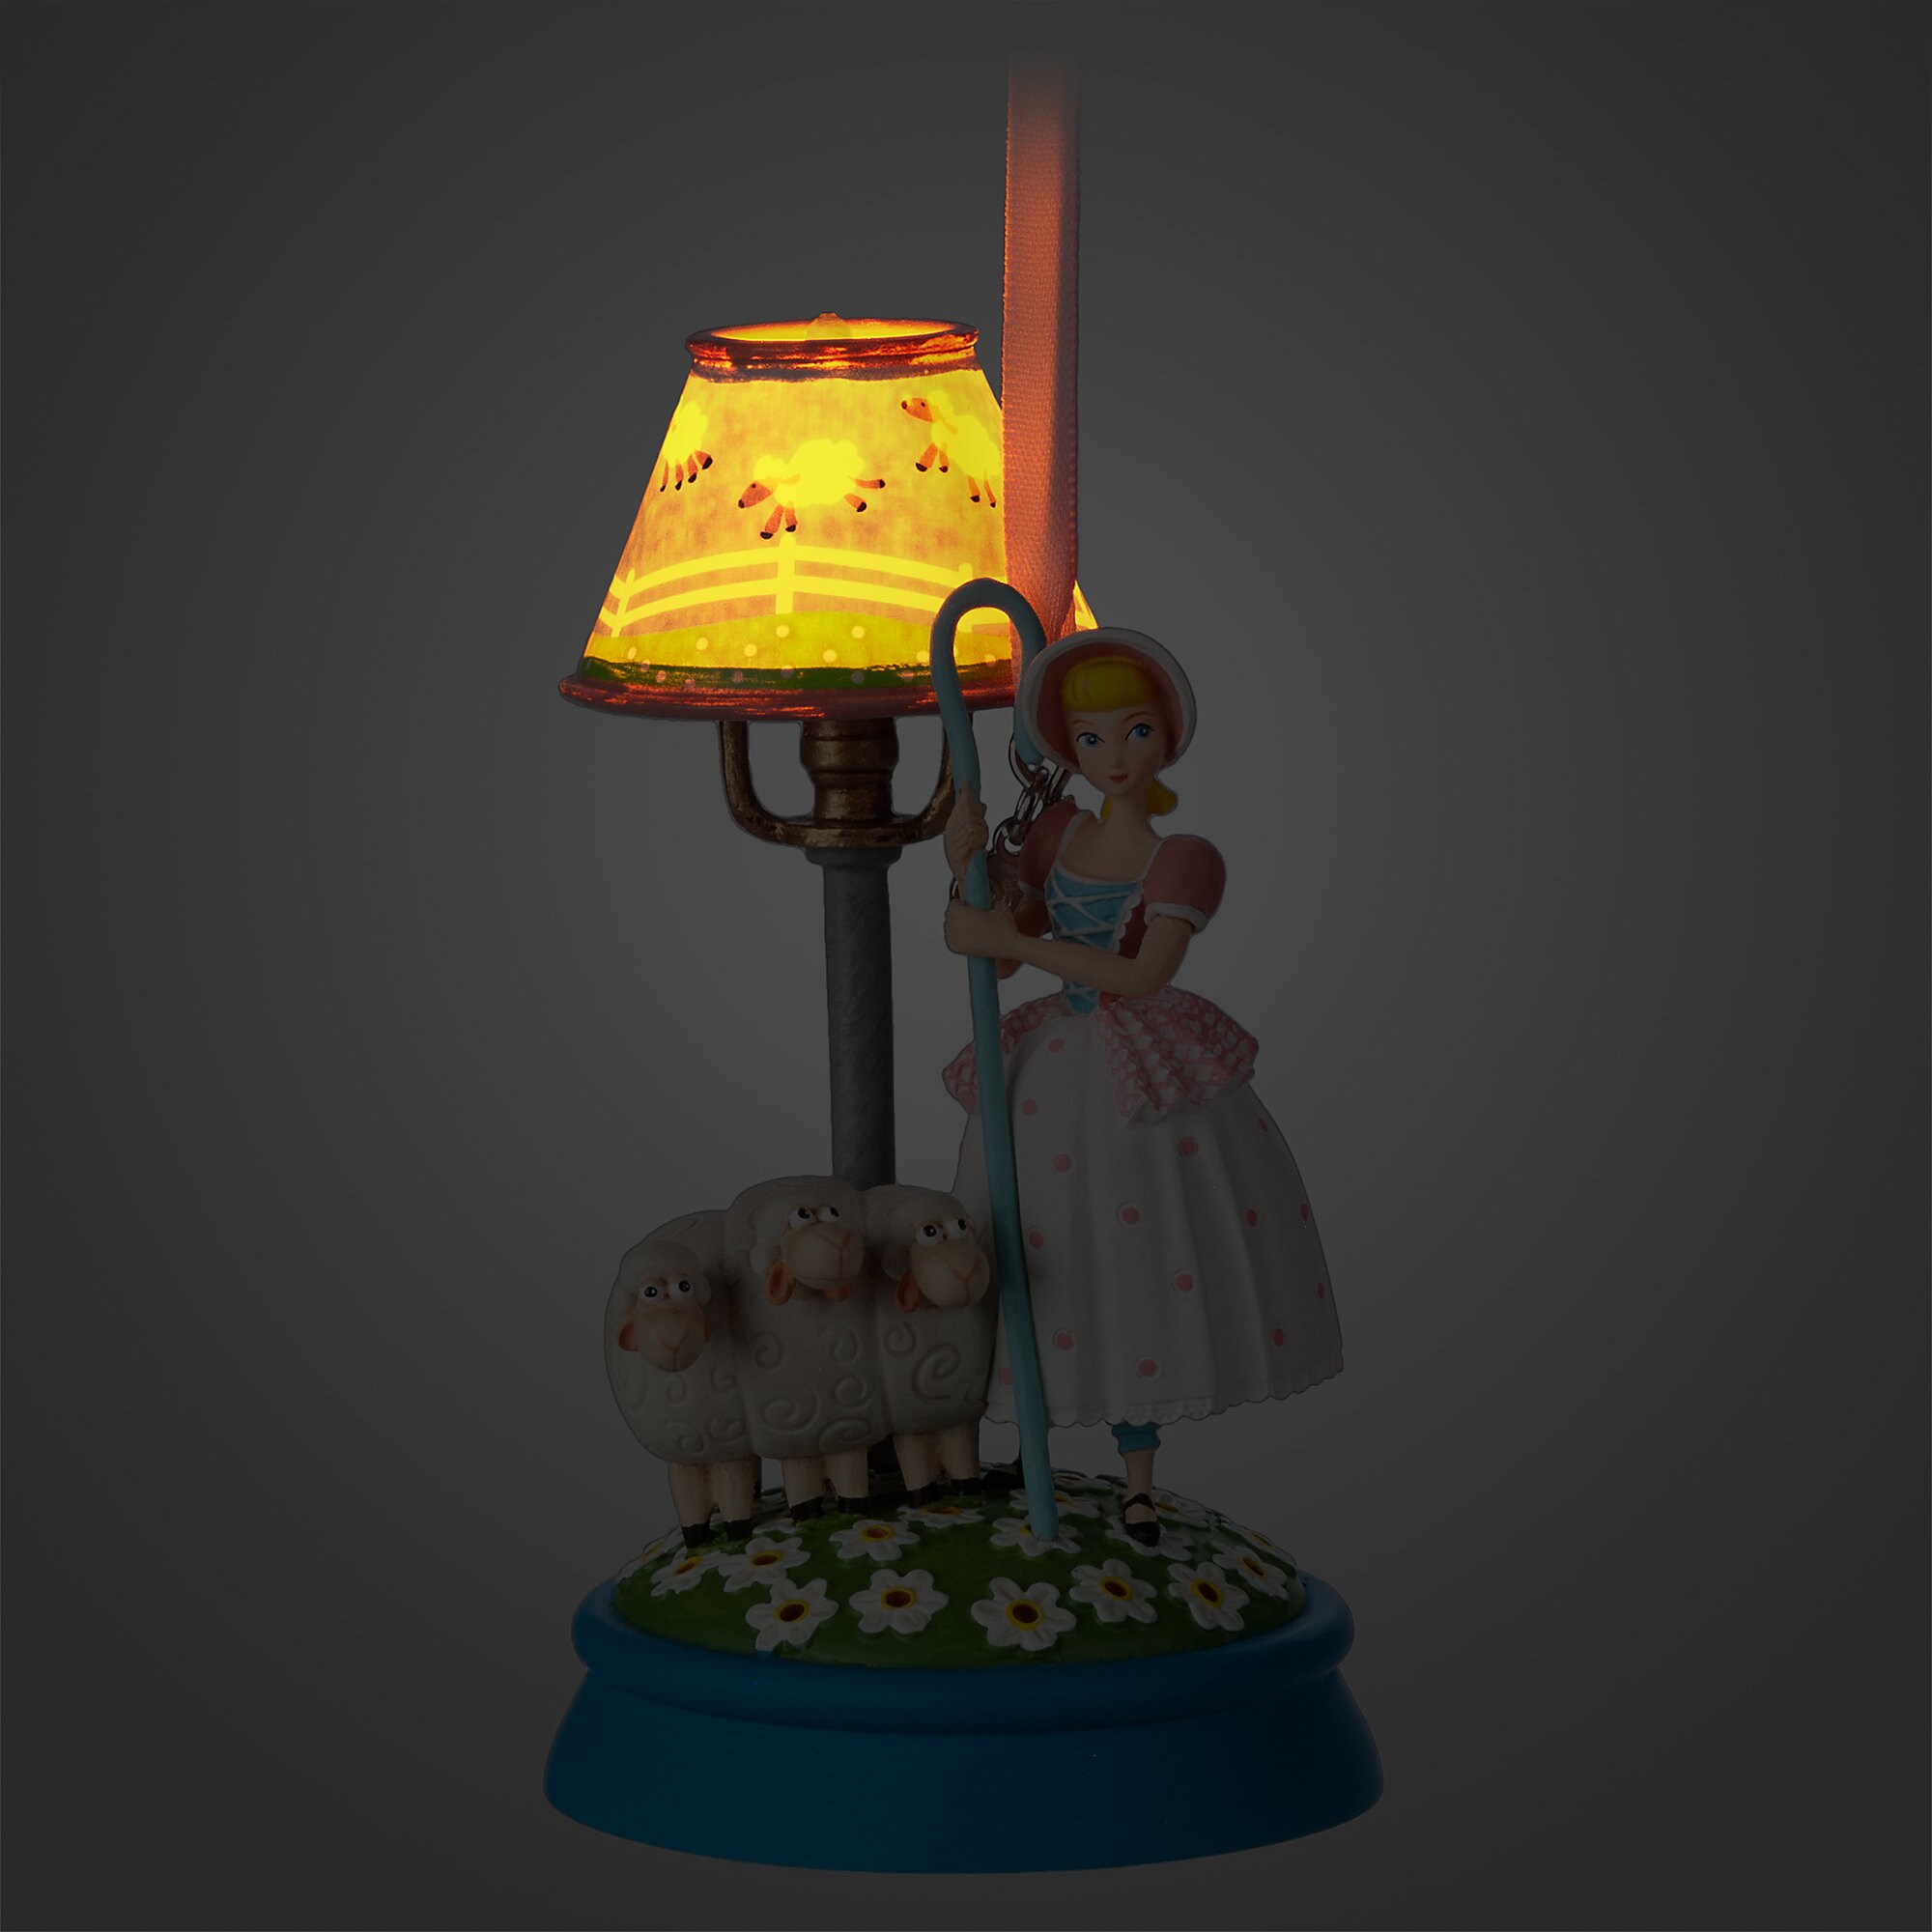 Bo Peep and Sheep Light-Up Sketchbook Ornament - Toy Story 4